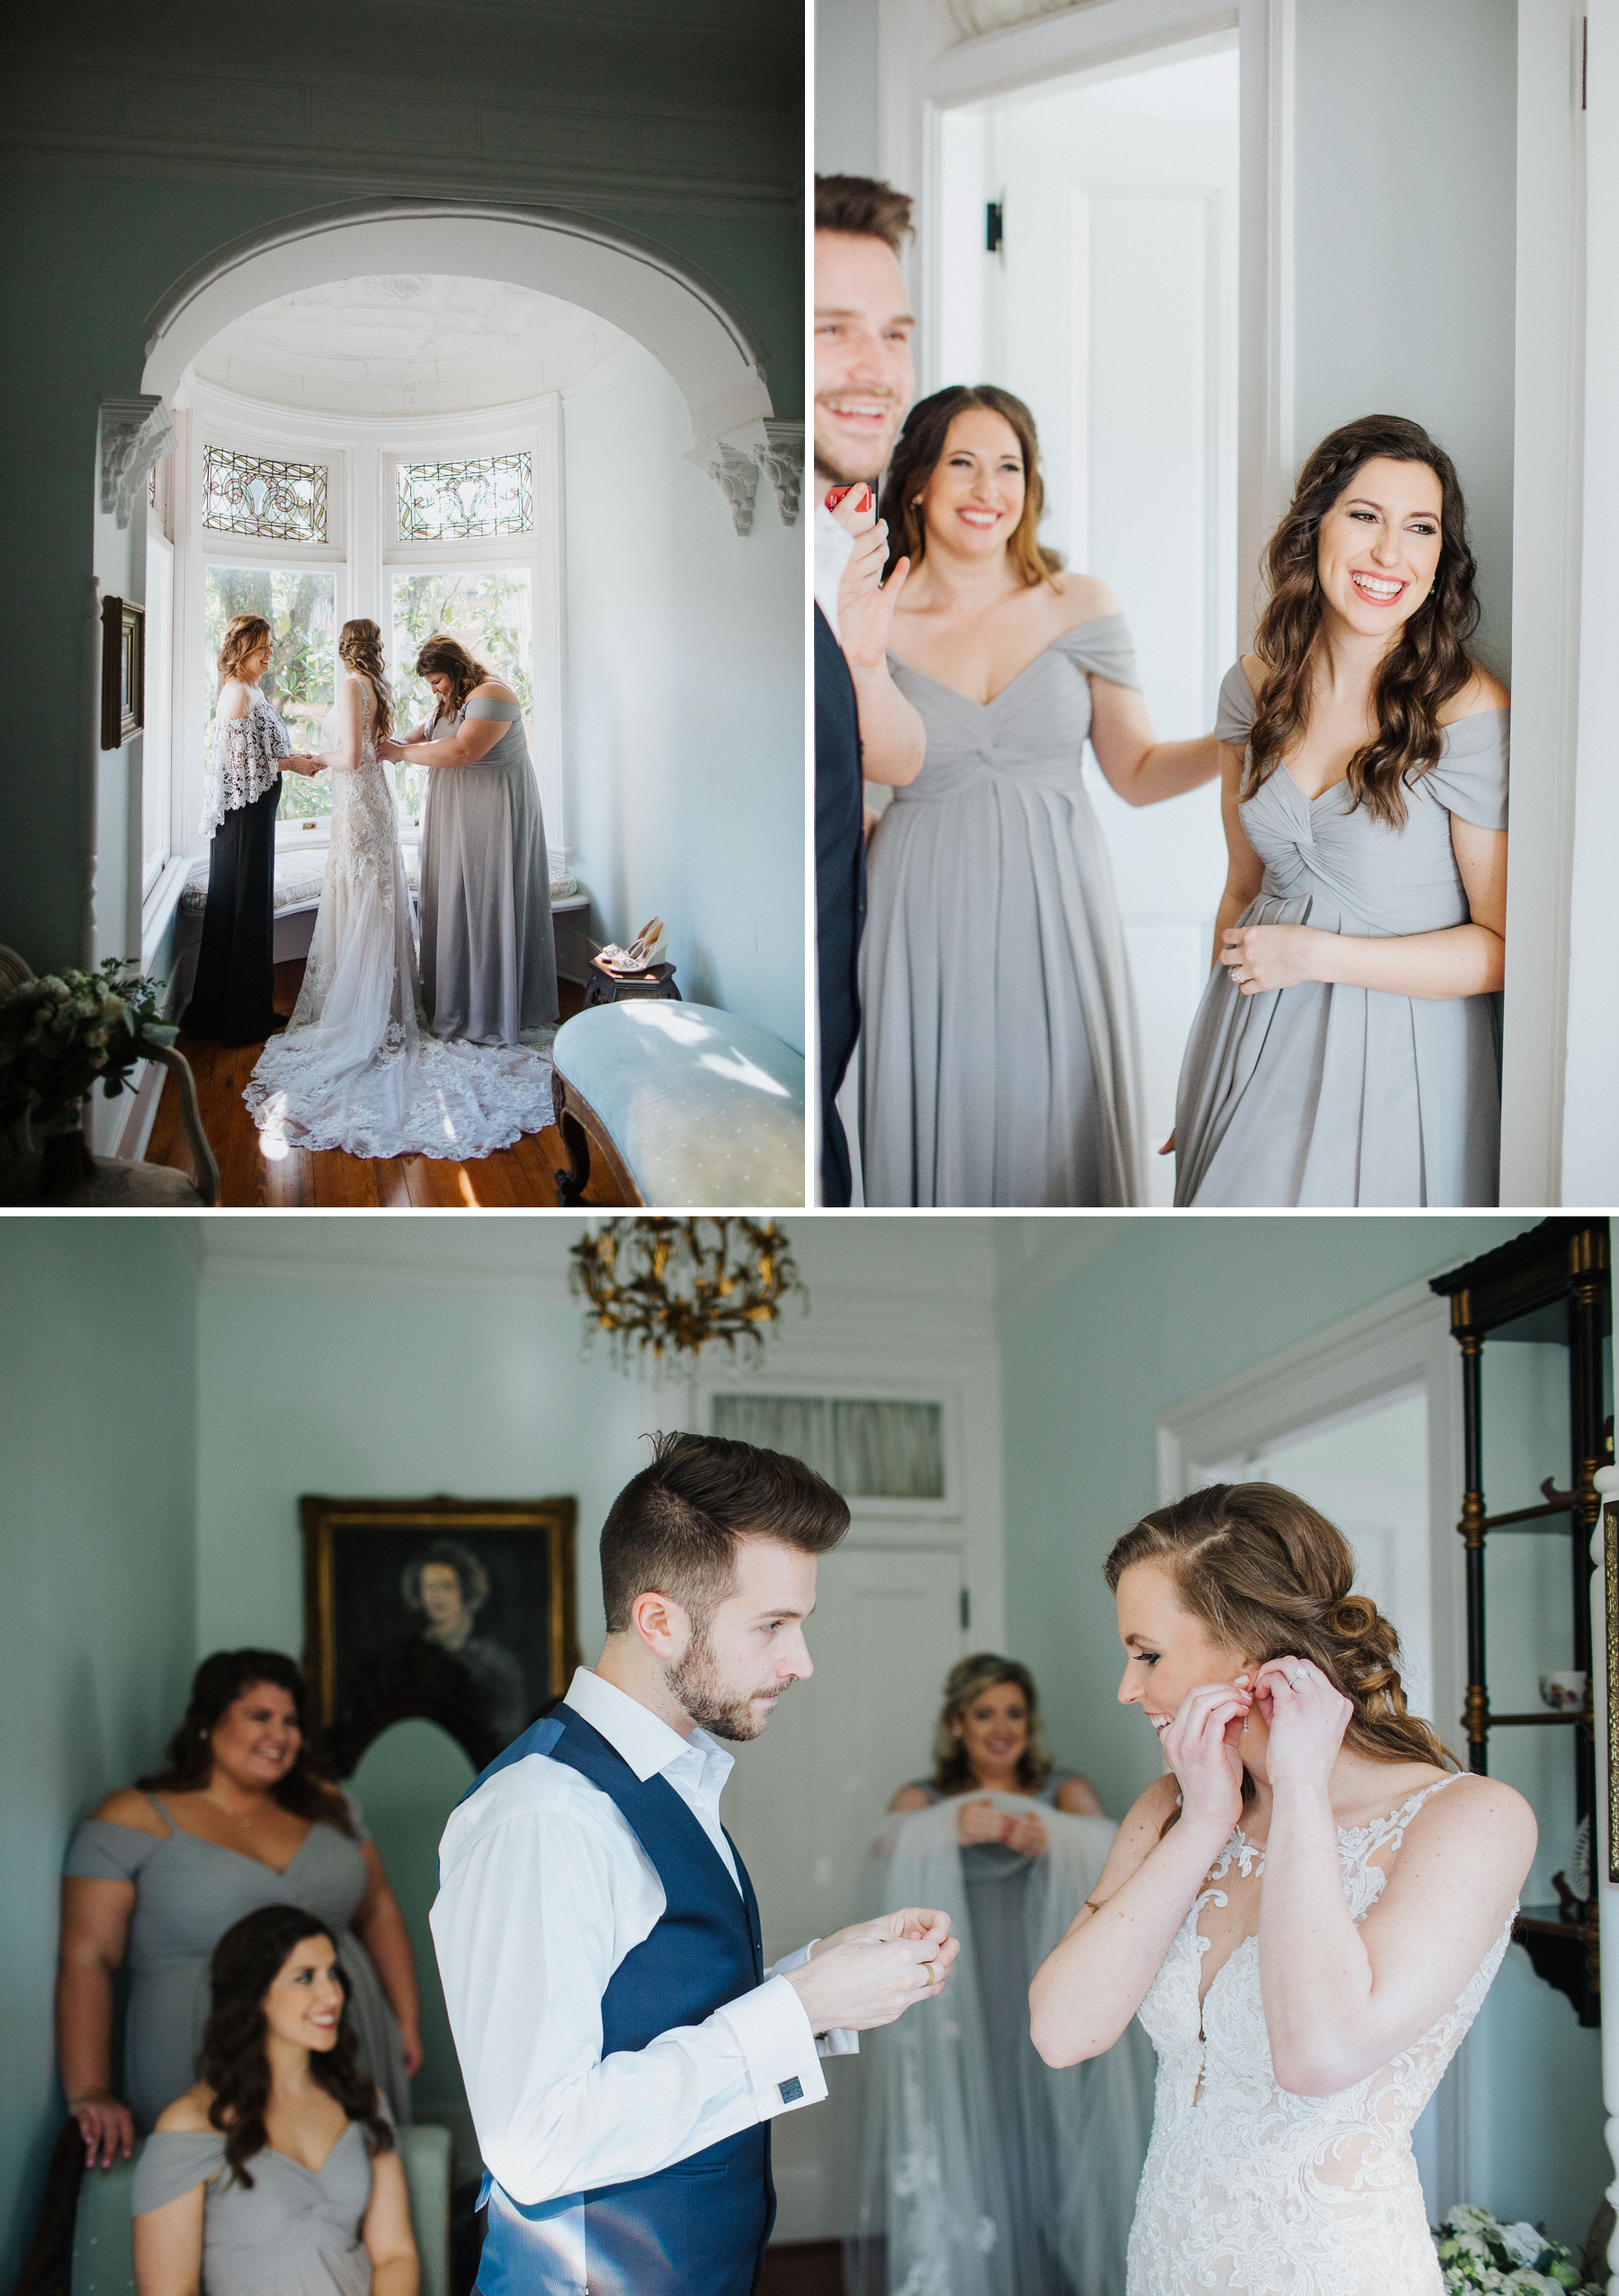 Bridal party in soft gray and navy – Gray bridesmaids dresses